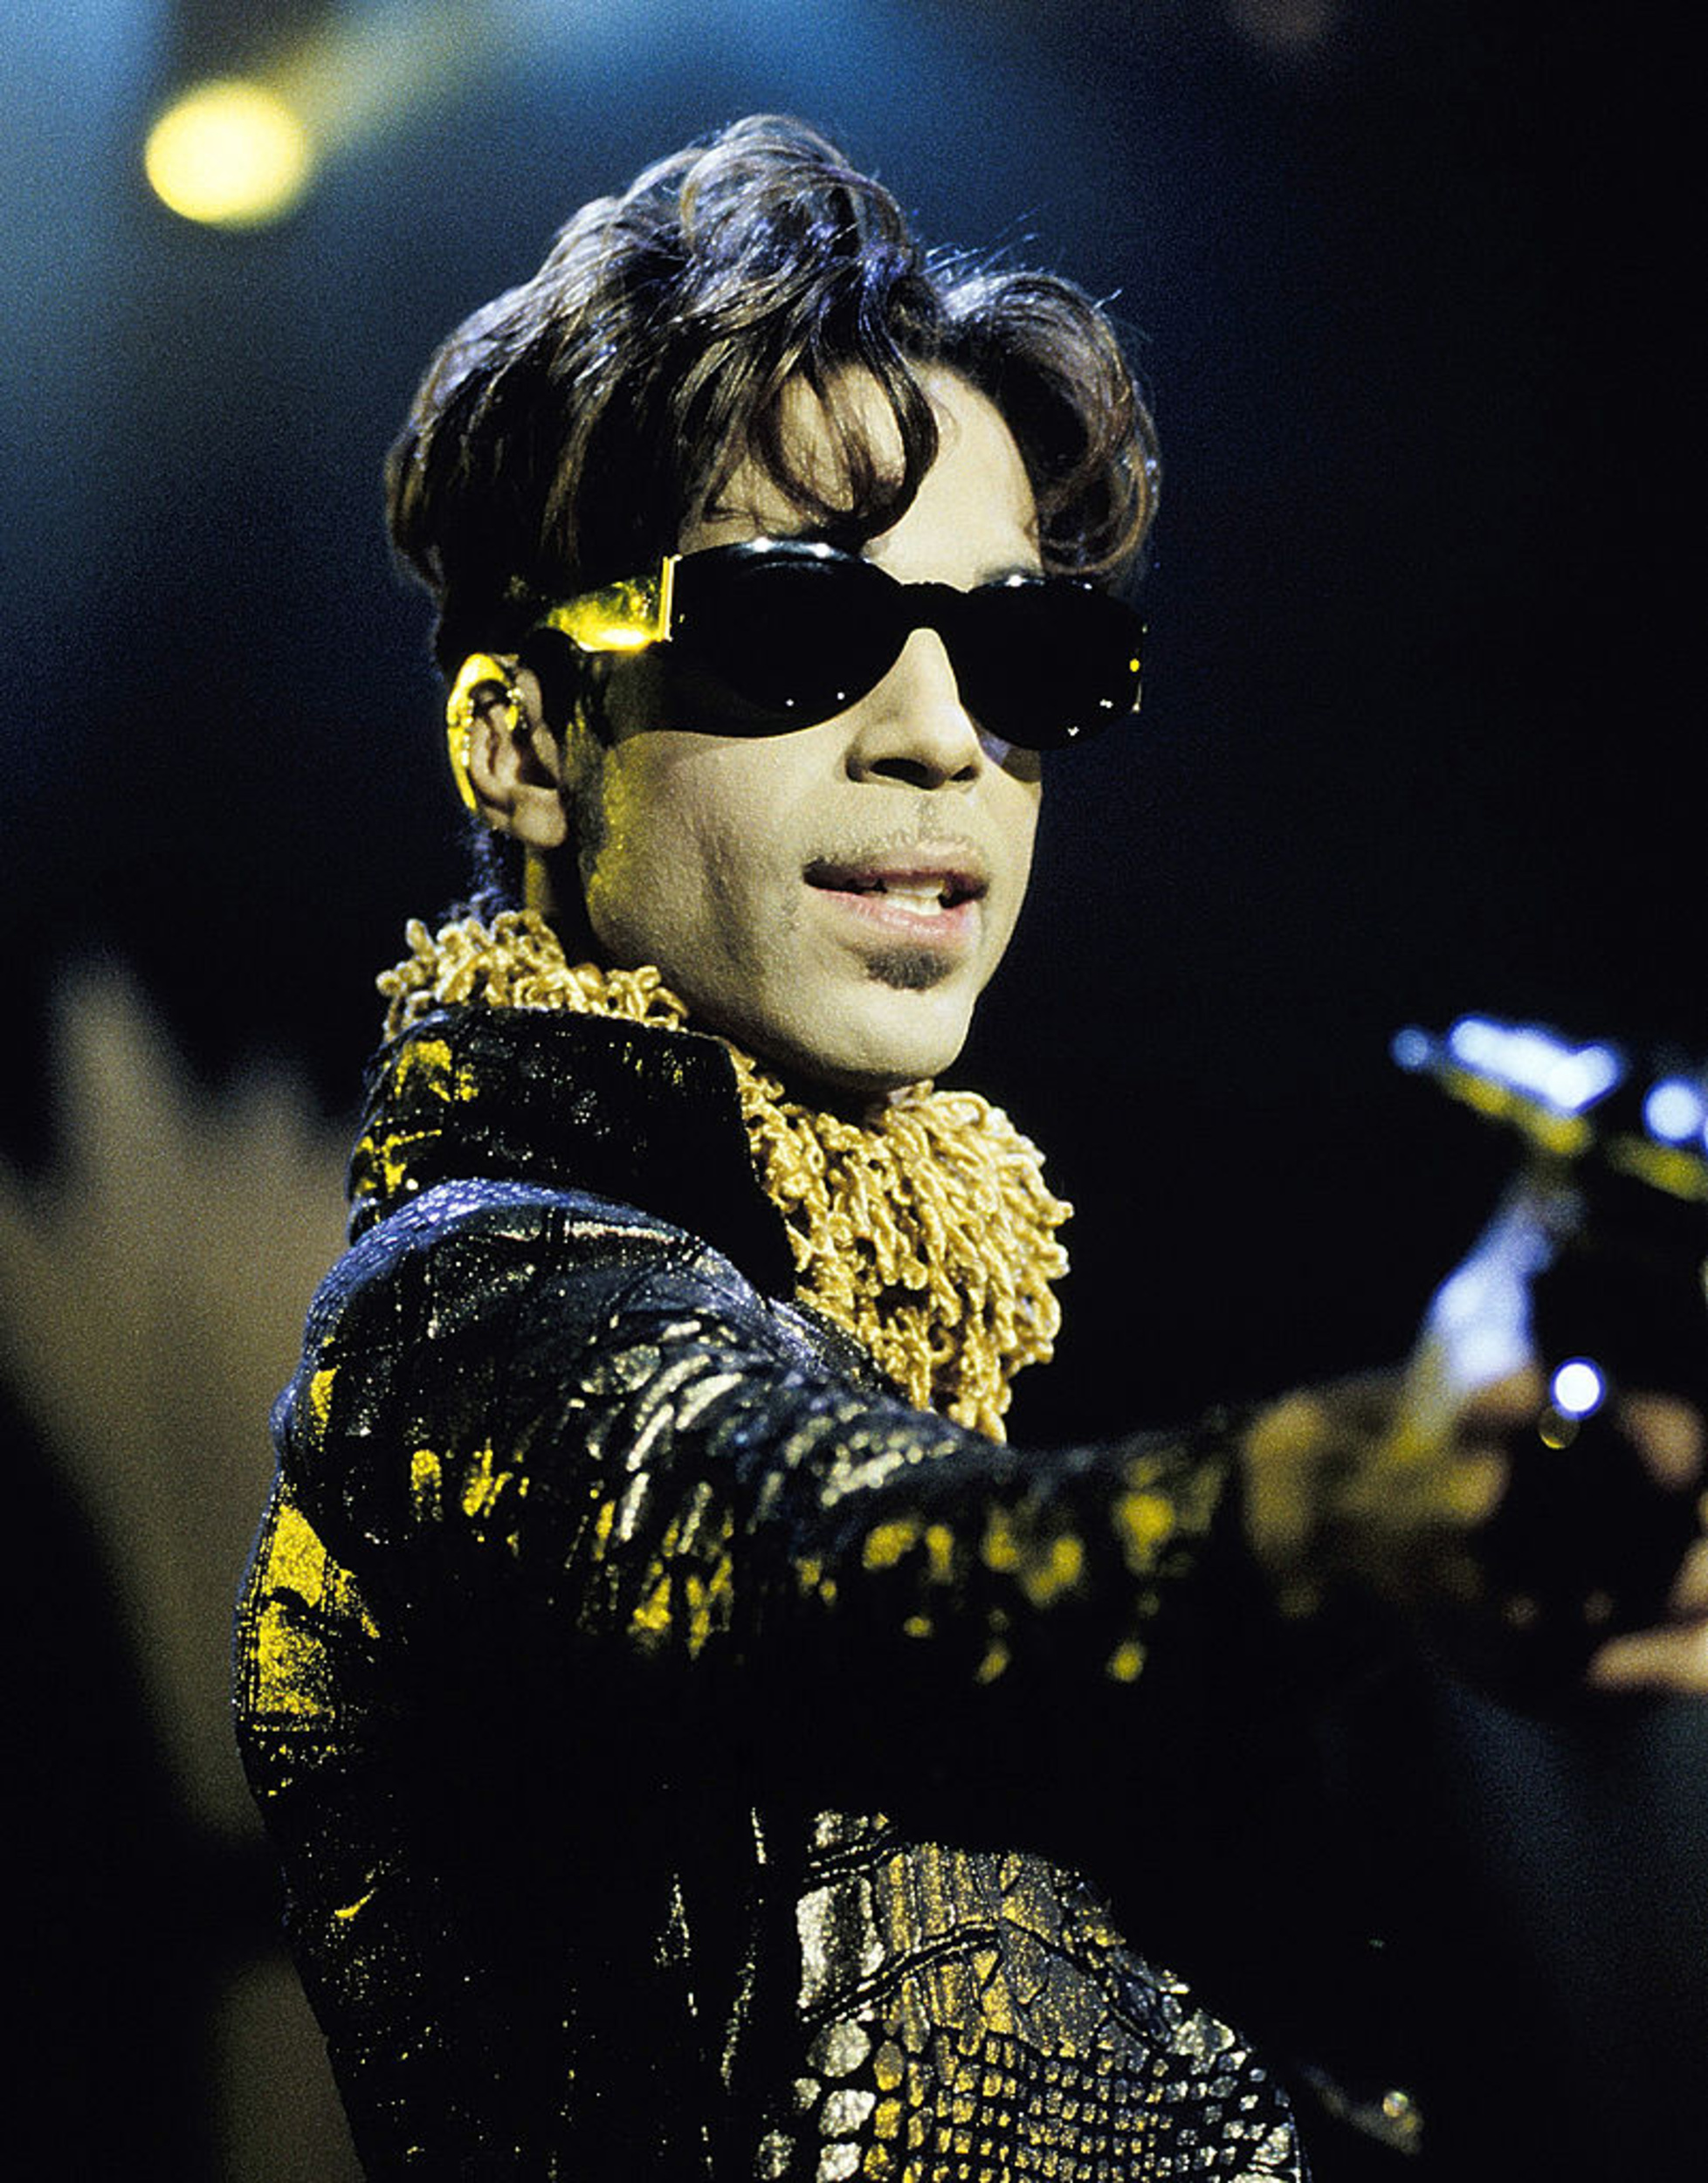 <p>Technically more of a song for when you're hoping to make up with a lost love. There's no better melody to ease the pain than Prince's iconic "Purple Rain." </p><p>You may also like: <a href='https://www.yardbarker.com/entertainment/articles/the_best_covers_of_beatles_songs_121923/s1__34247570'>The best covers of Beatles songs</a></p>